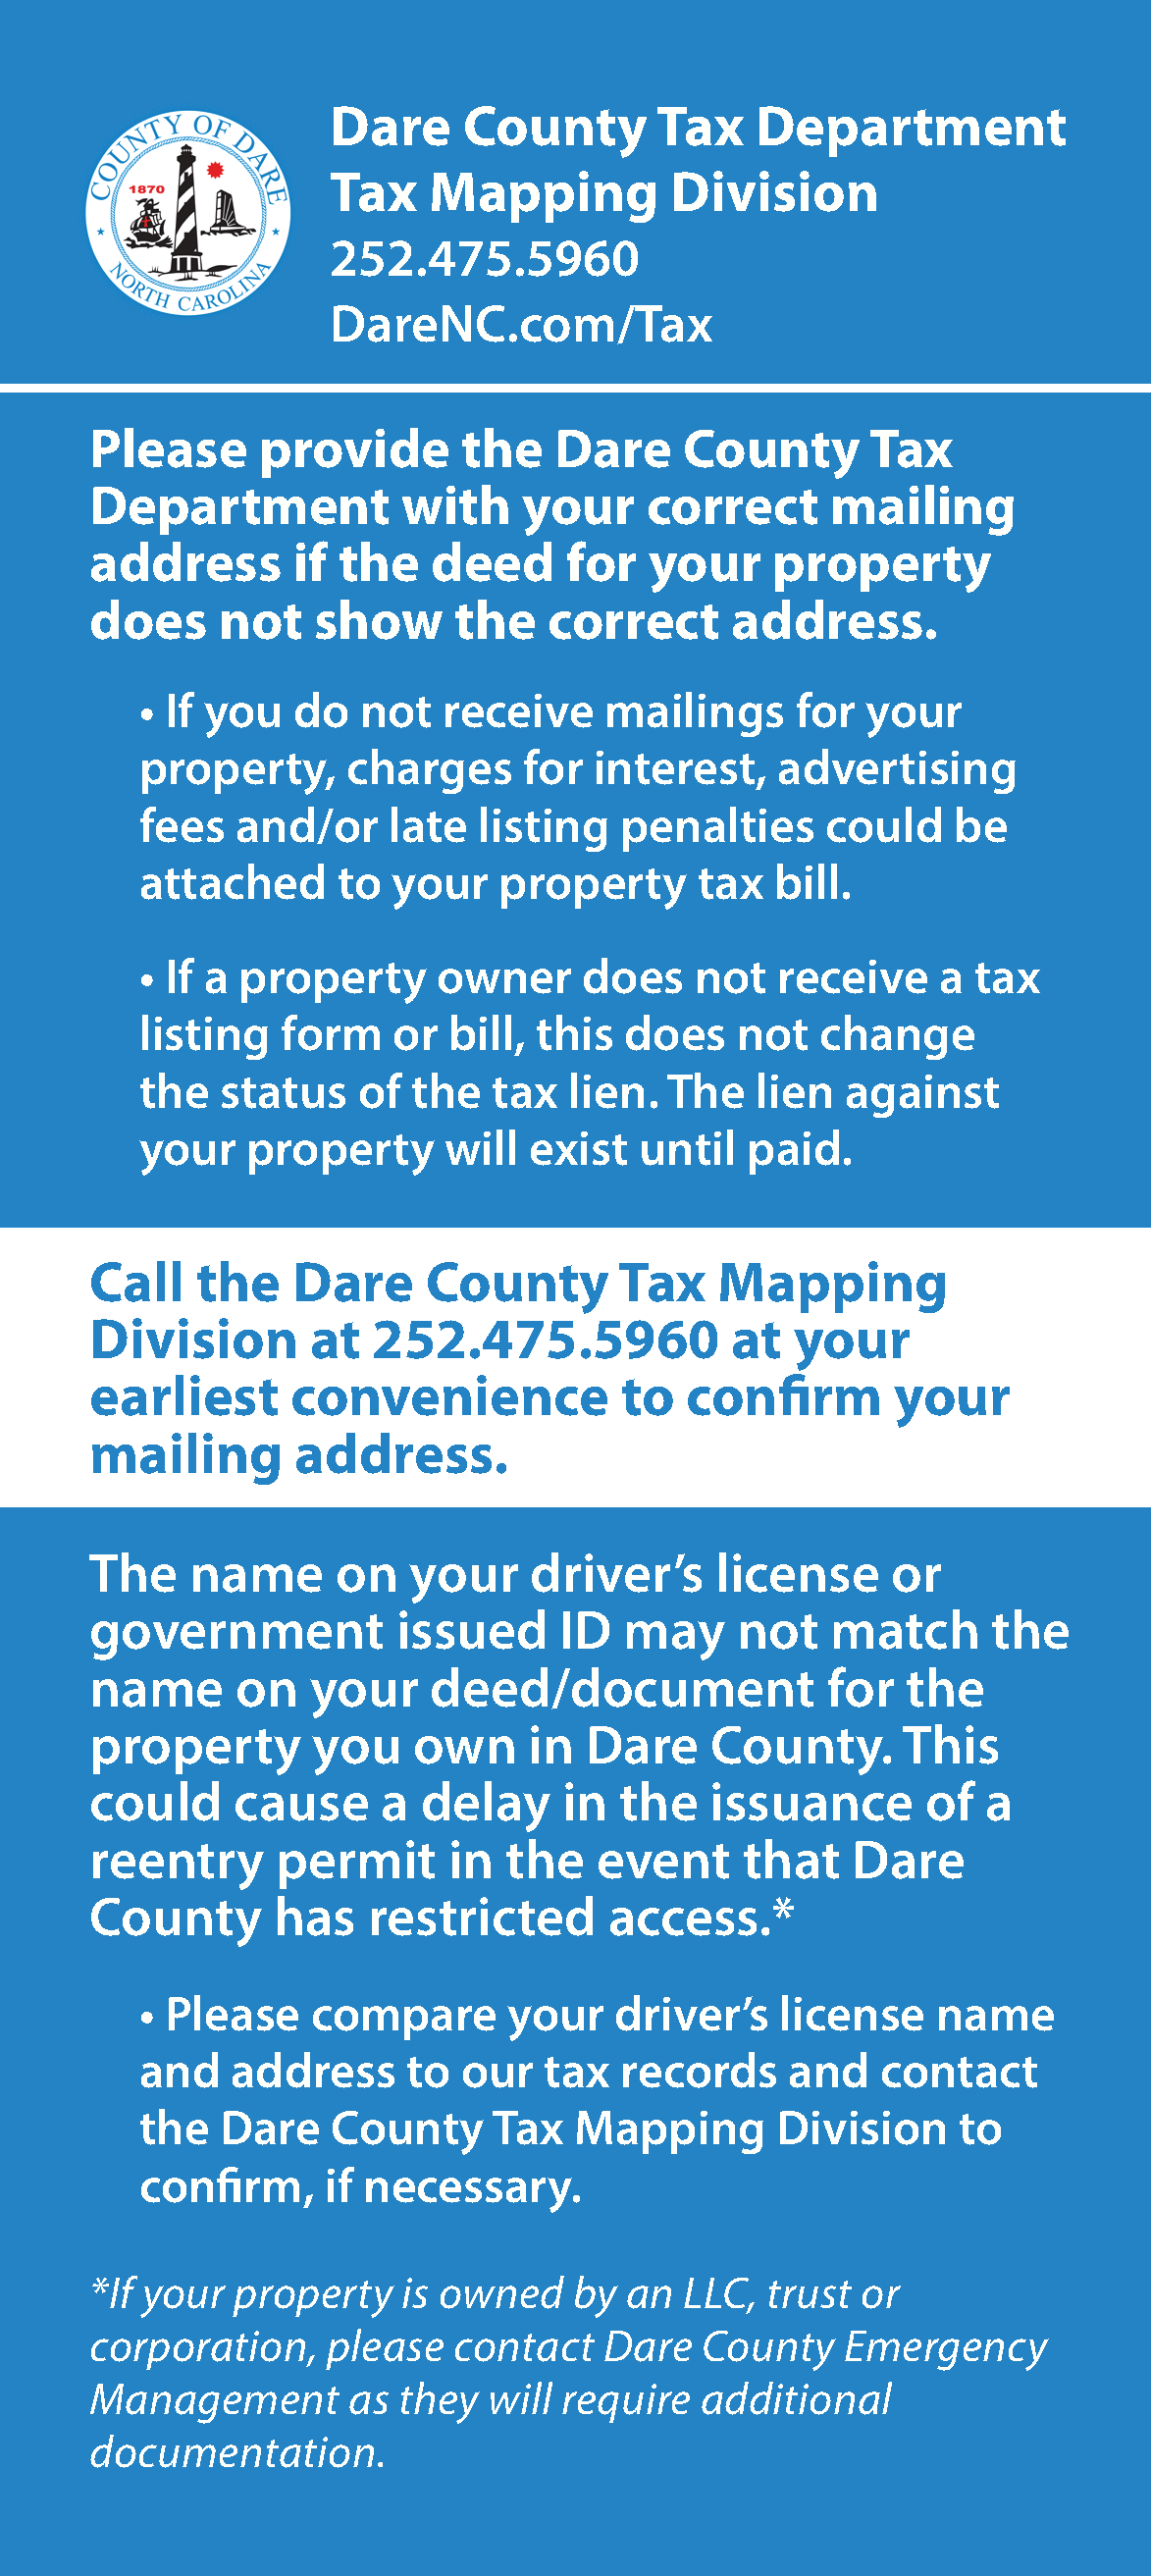 Call the Dare County Tax Mapping Division at 252.475.5960 at your earliest convenience to confirm your mailing address. If you do not receive mailings for your property, charges for interest could be attached to your property tax bill.